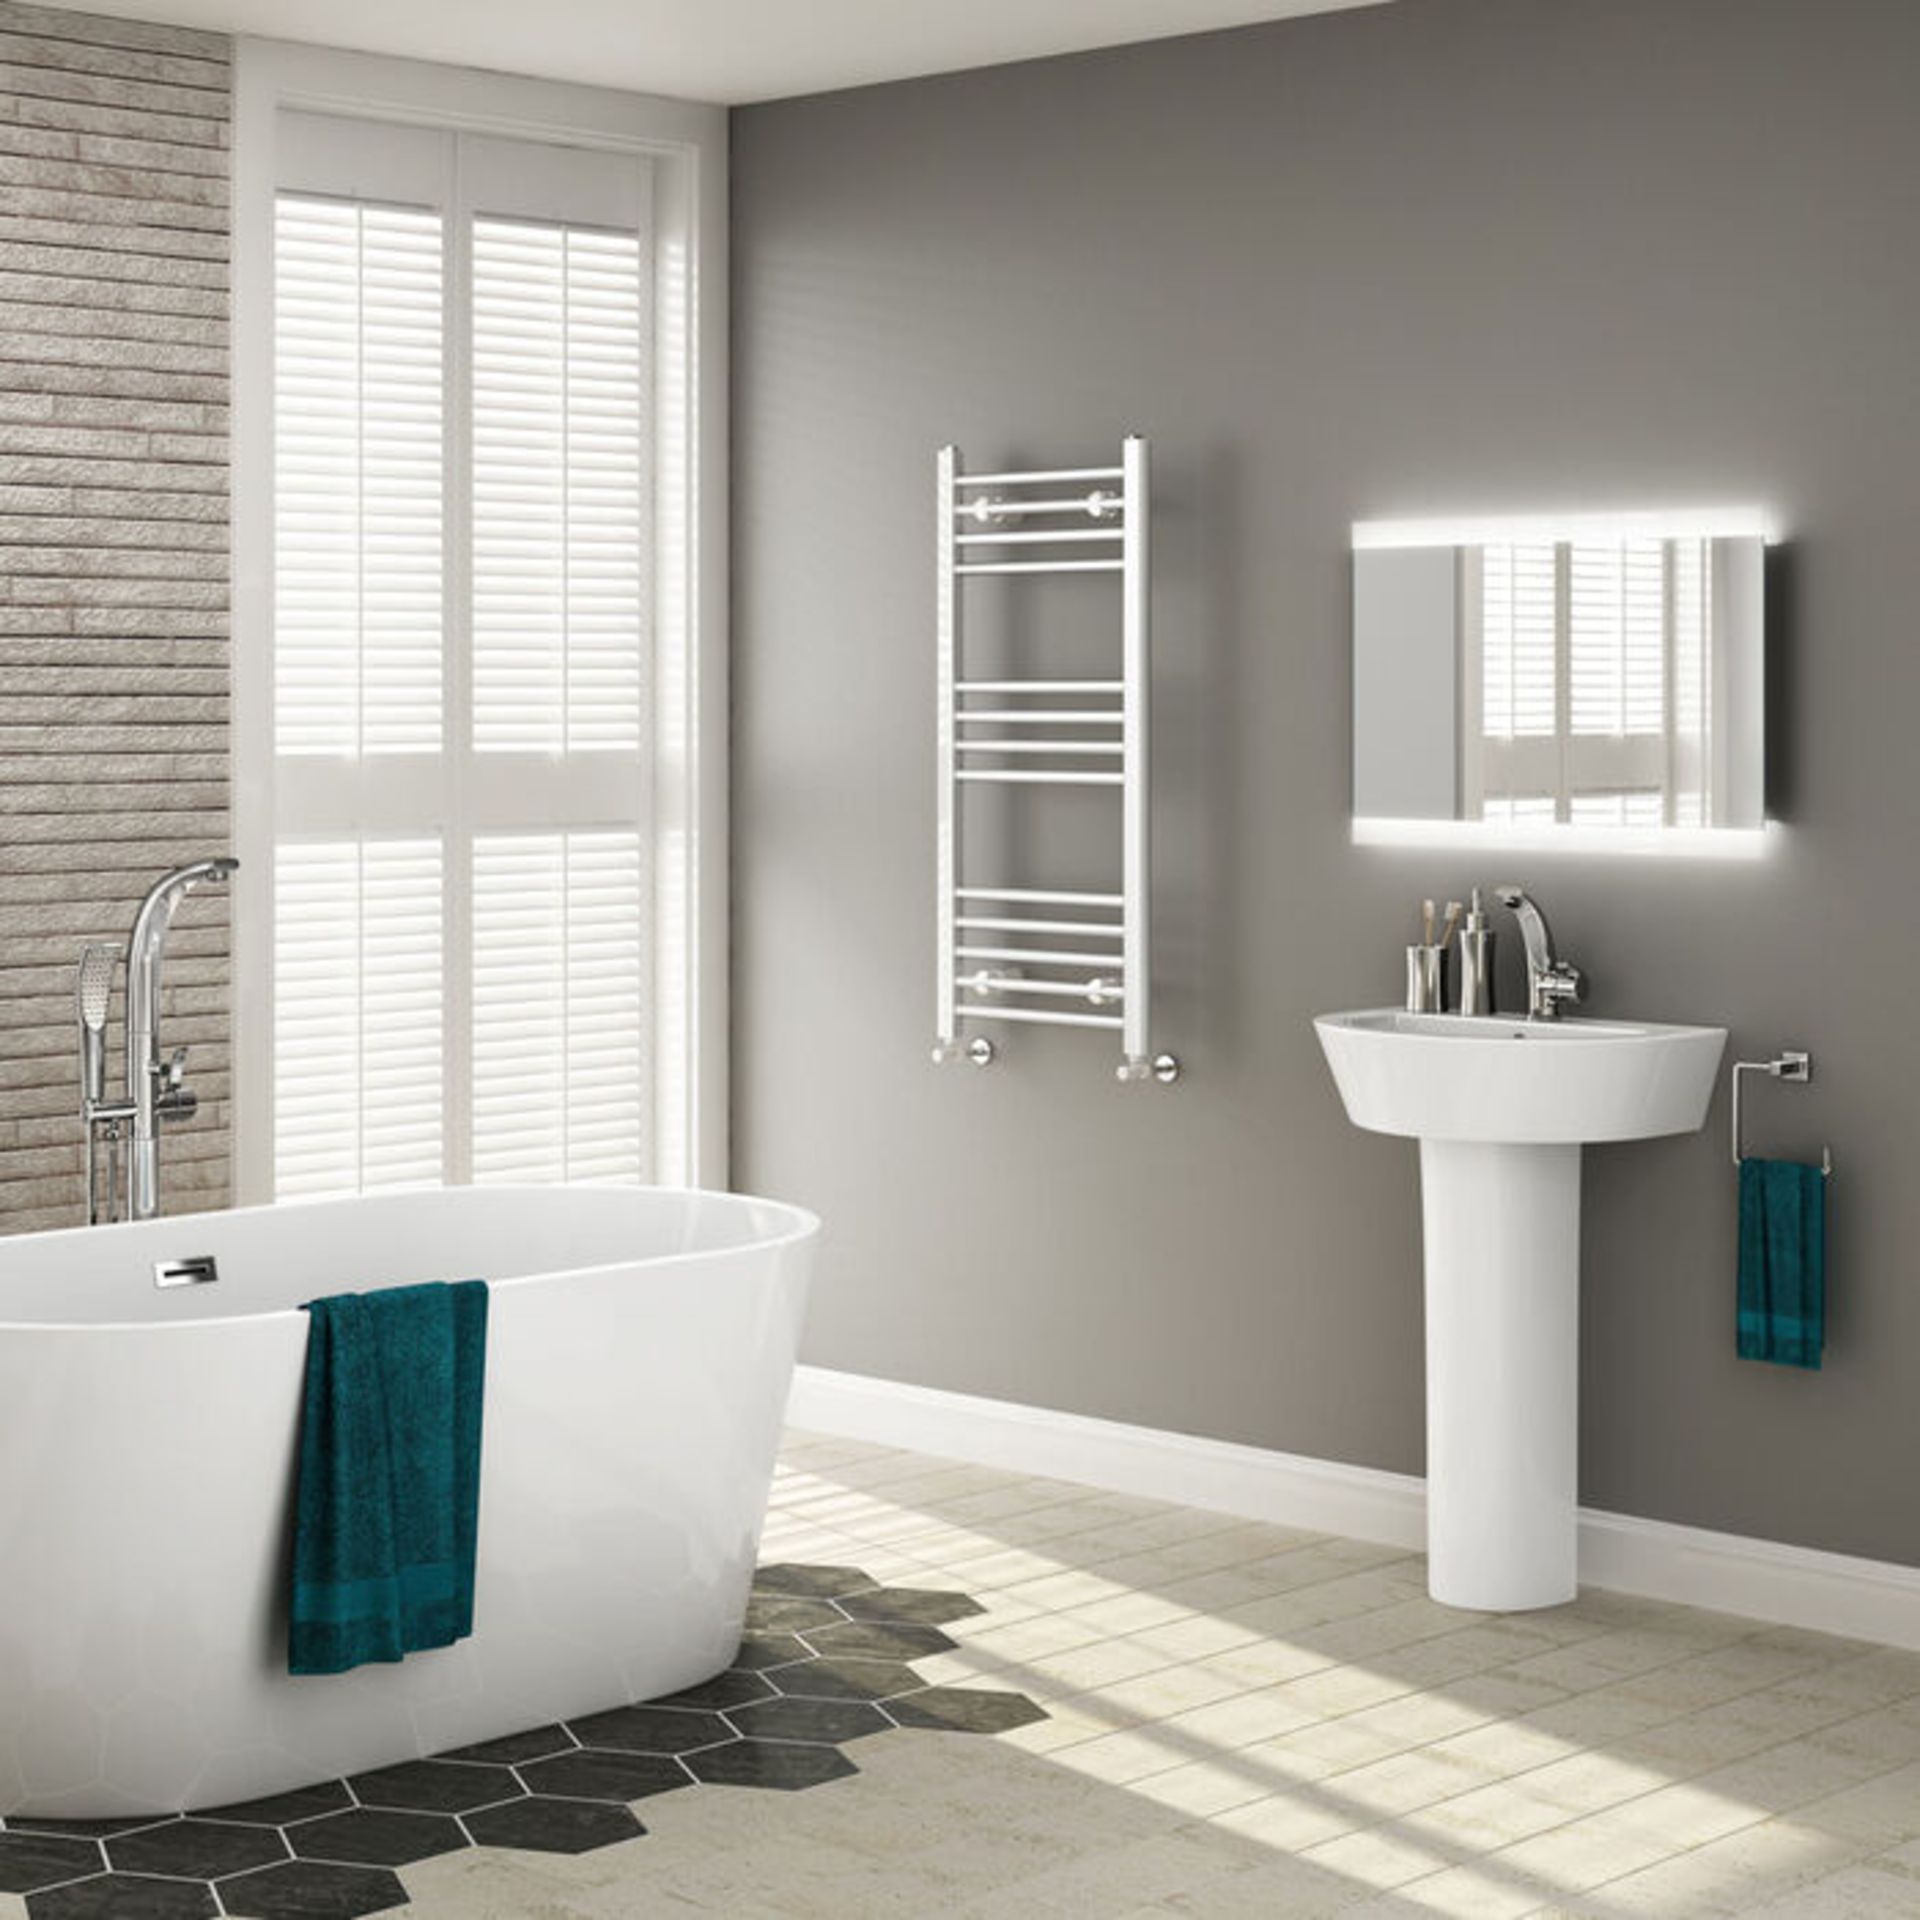 NEW (TT120) 800x450mm White Straight Rail Ladder Towel Radiator.RRP £249.99.Made from low carb... - Image 2 of 3